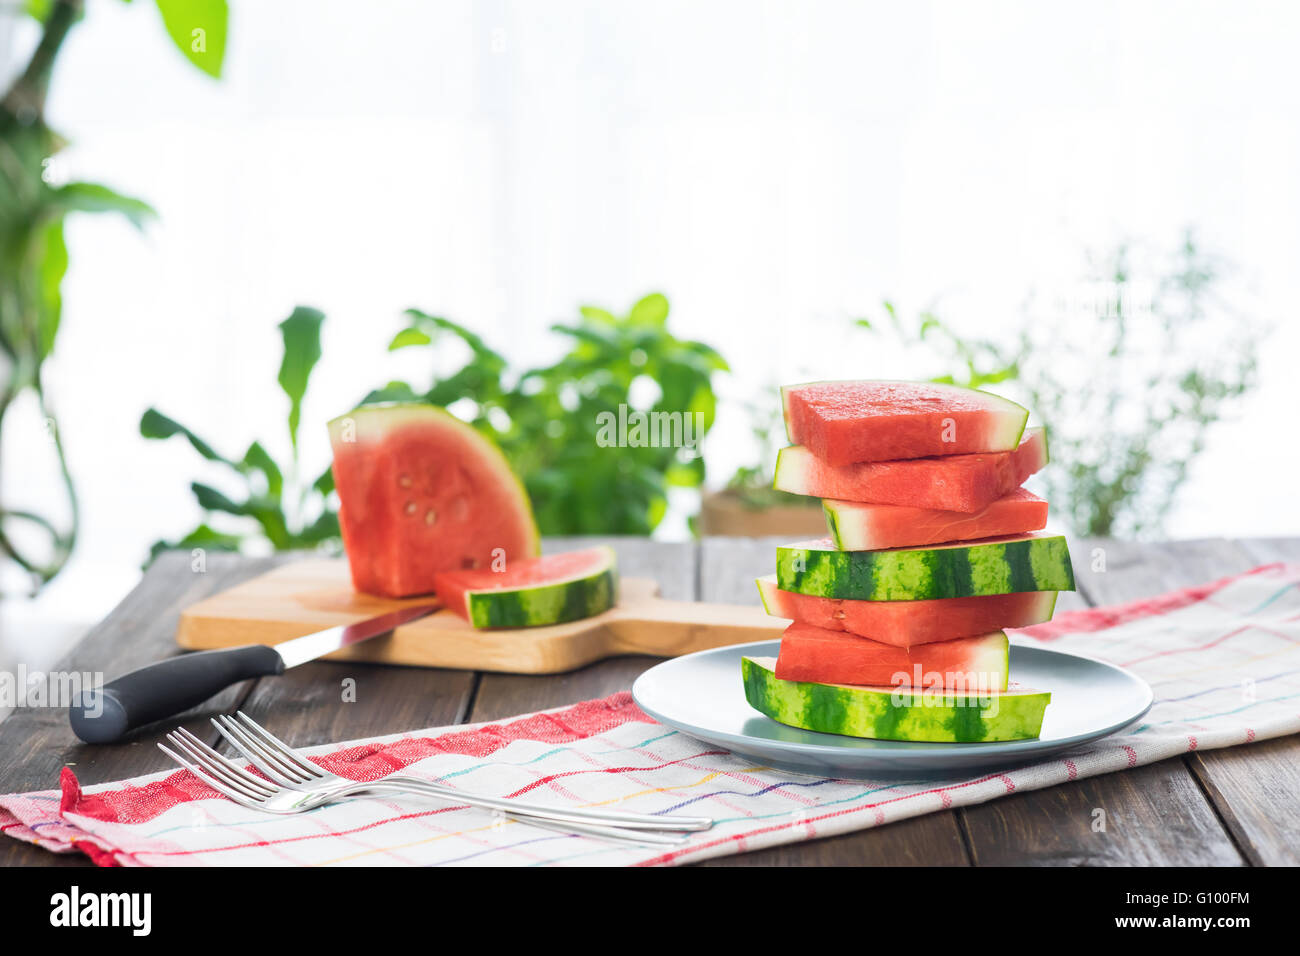 Slices of watermelon on wooden table in rustic style Stock Photo